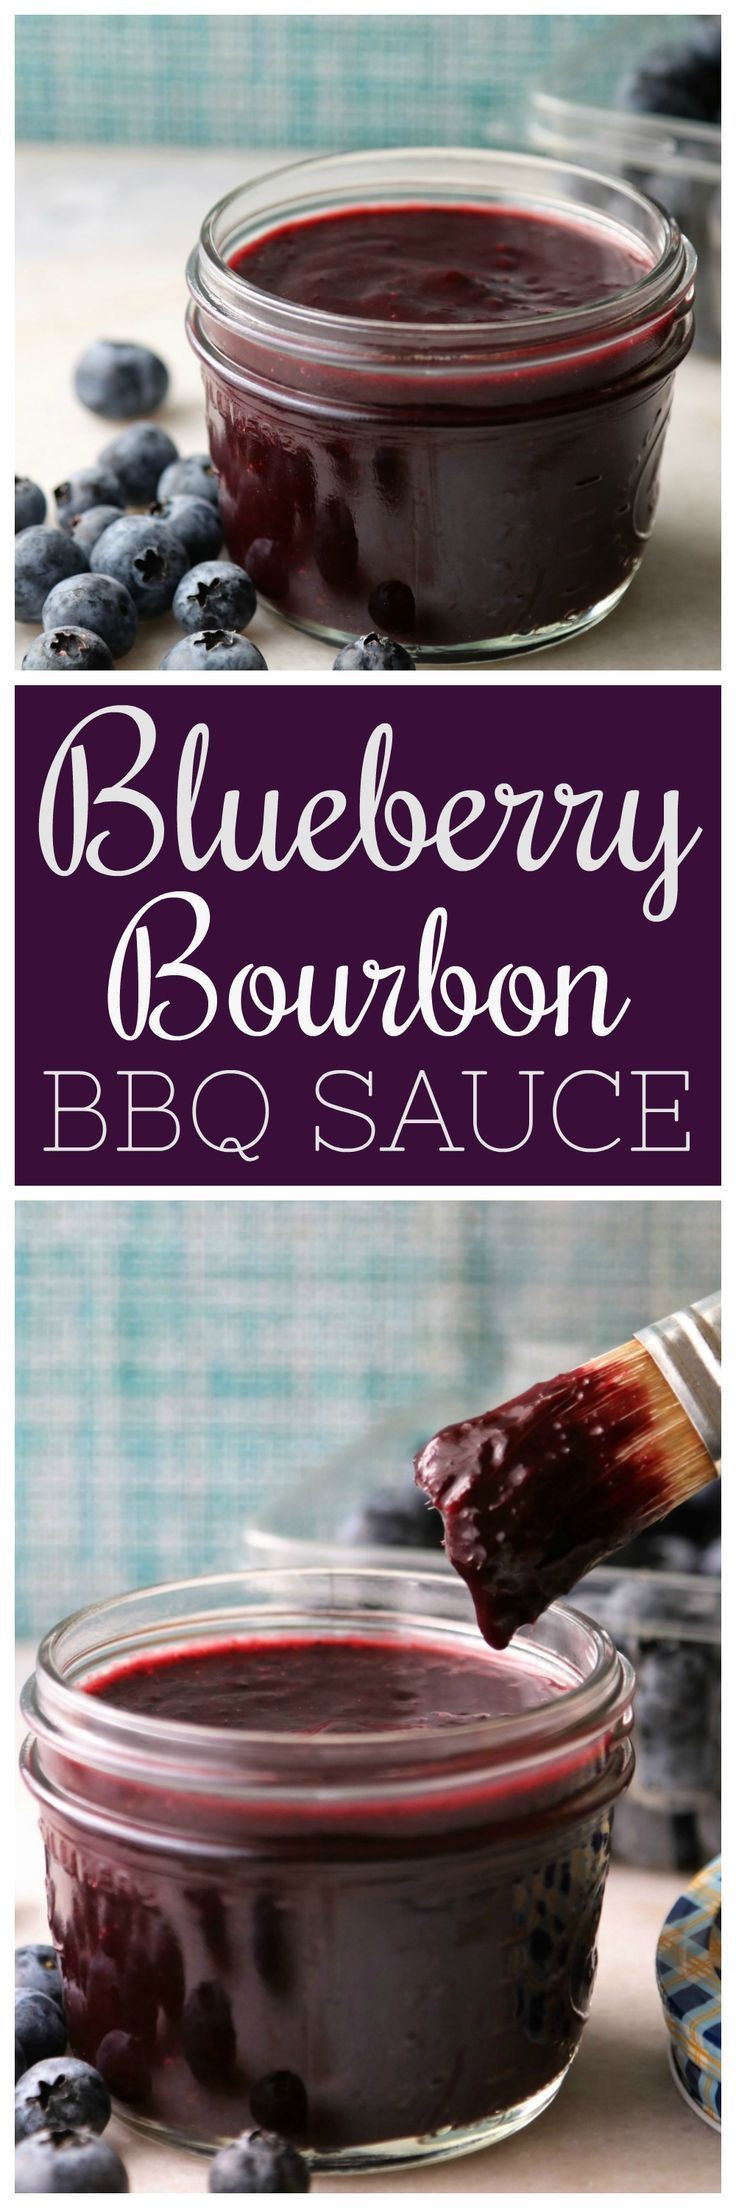 22 Best Blueberry Bbq Sauce Recipe - Best Recipes Ideas and Collections